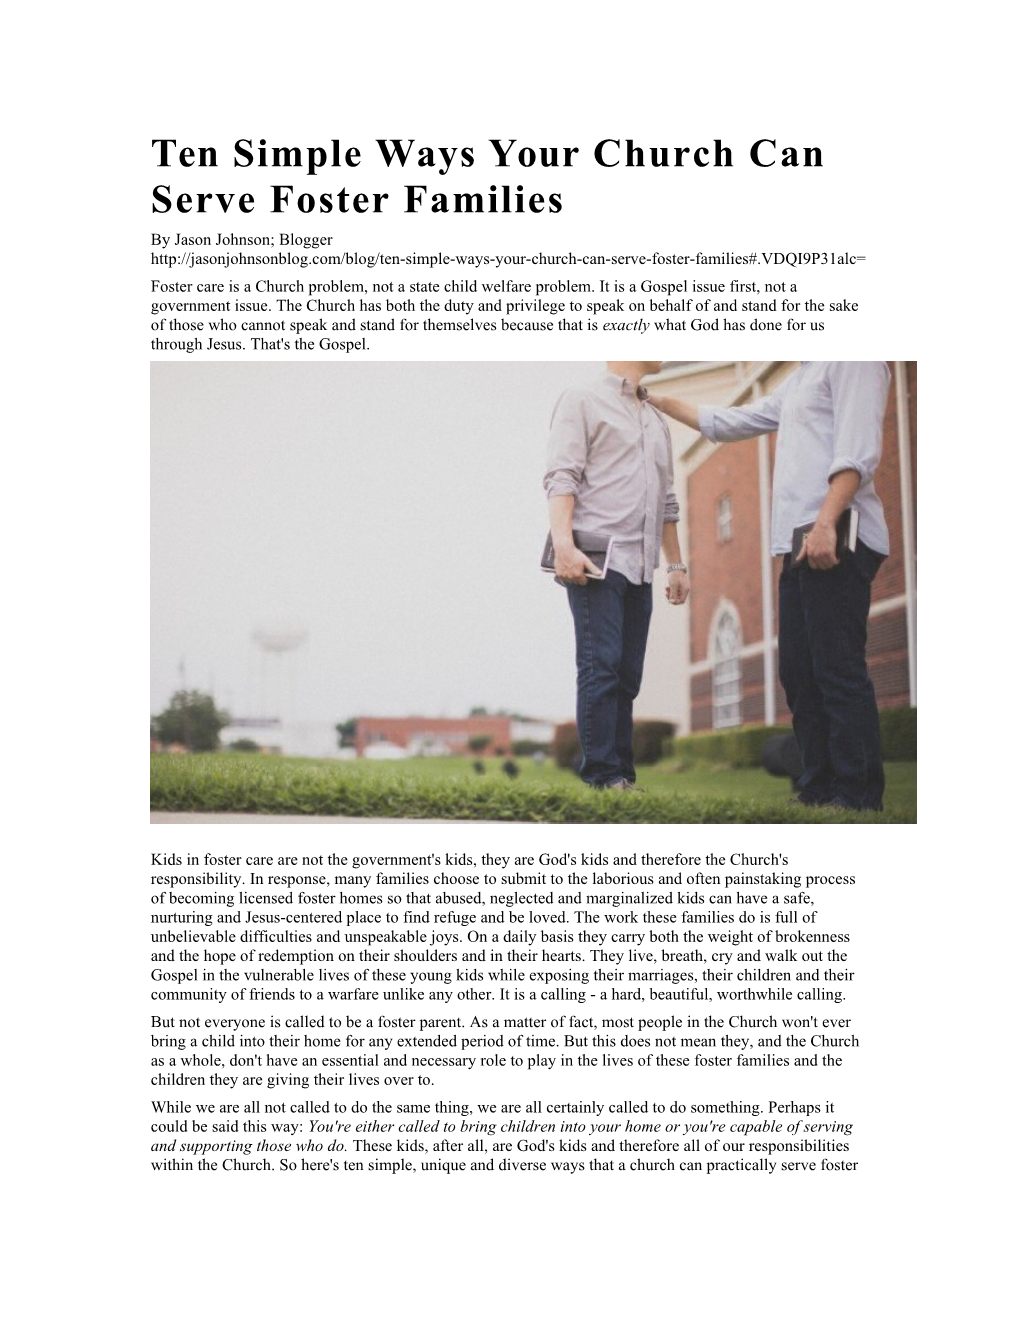 Ten Simple Ways Your Church Can Serve Foster Families